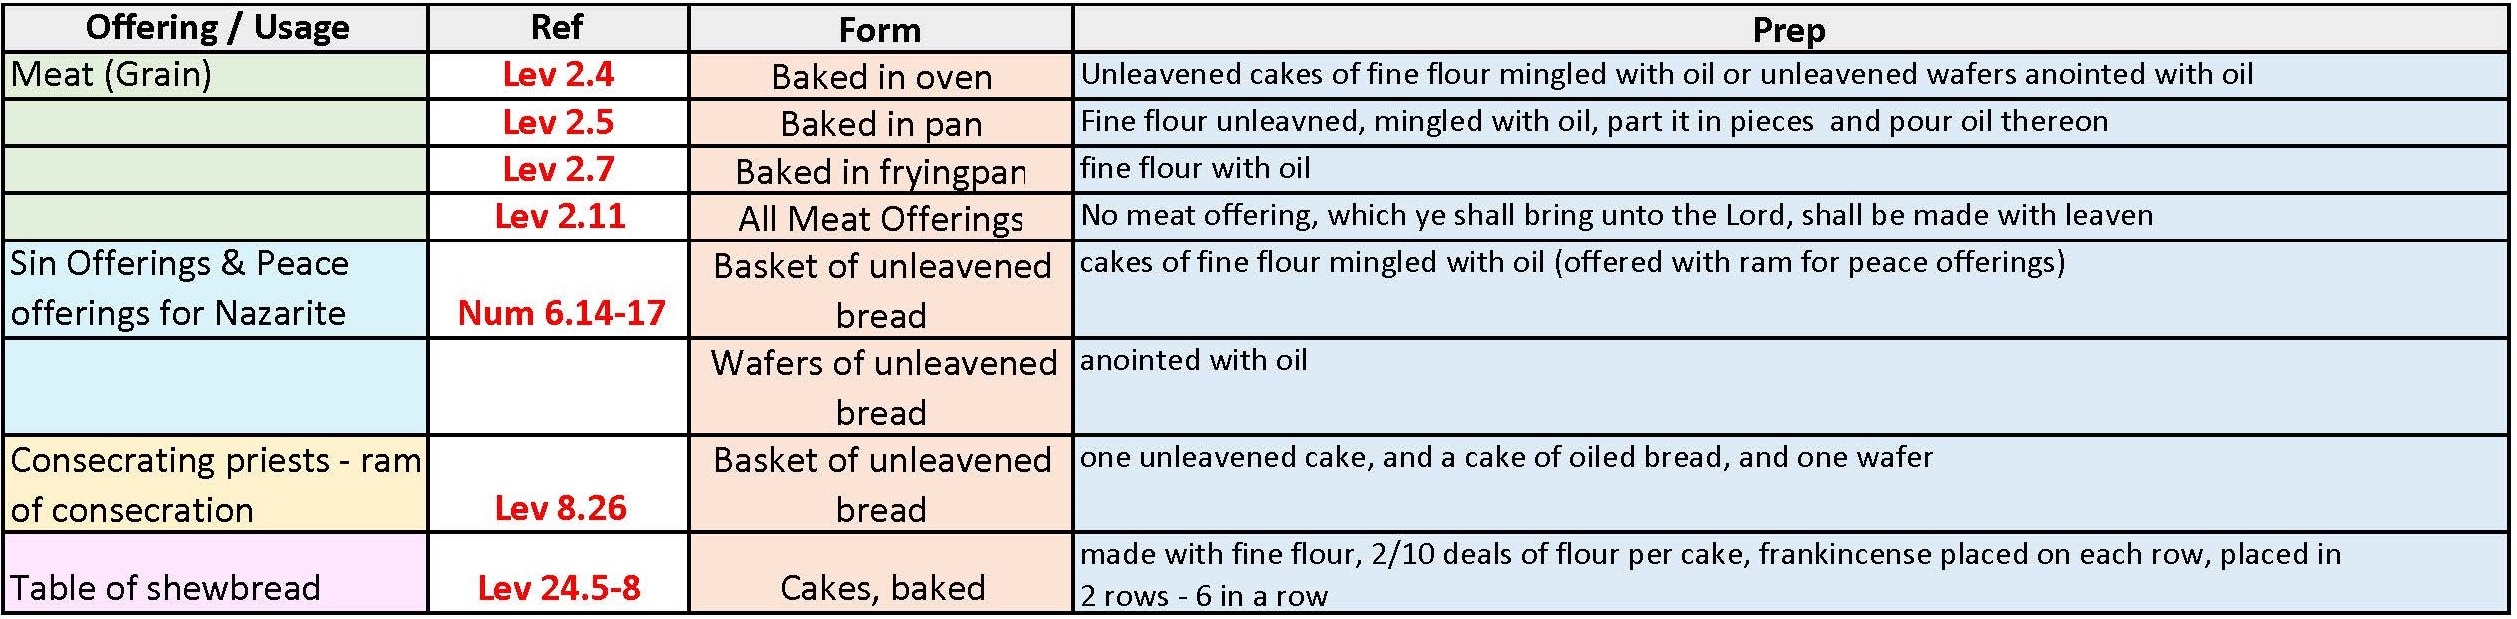 Uses of unleavened bread including the table of shewbread 